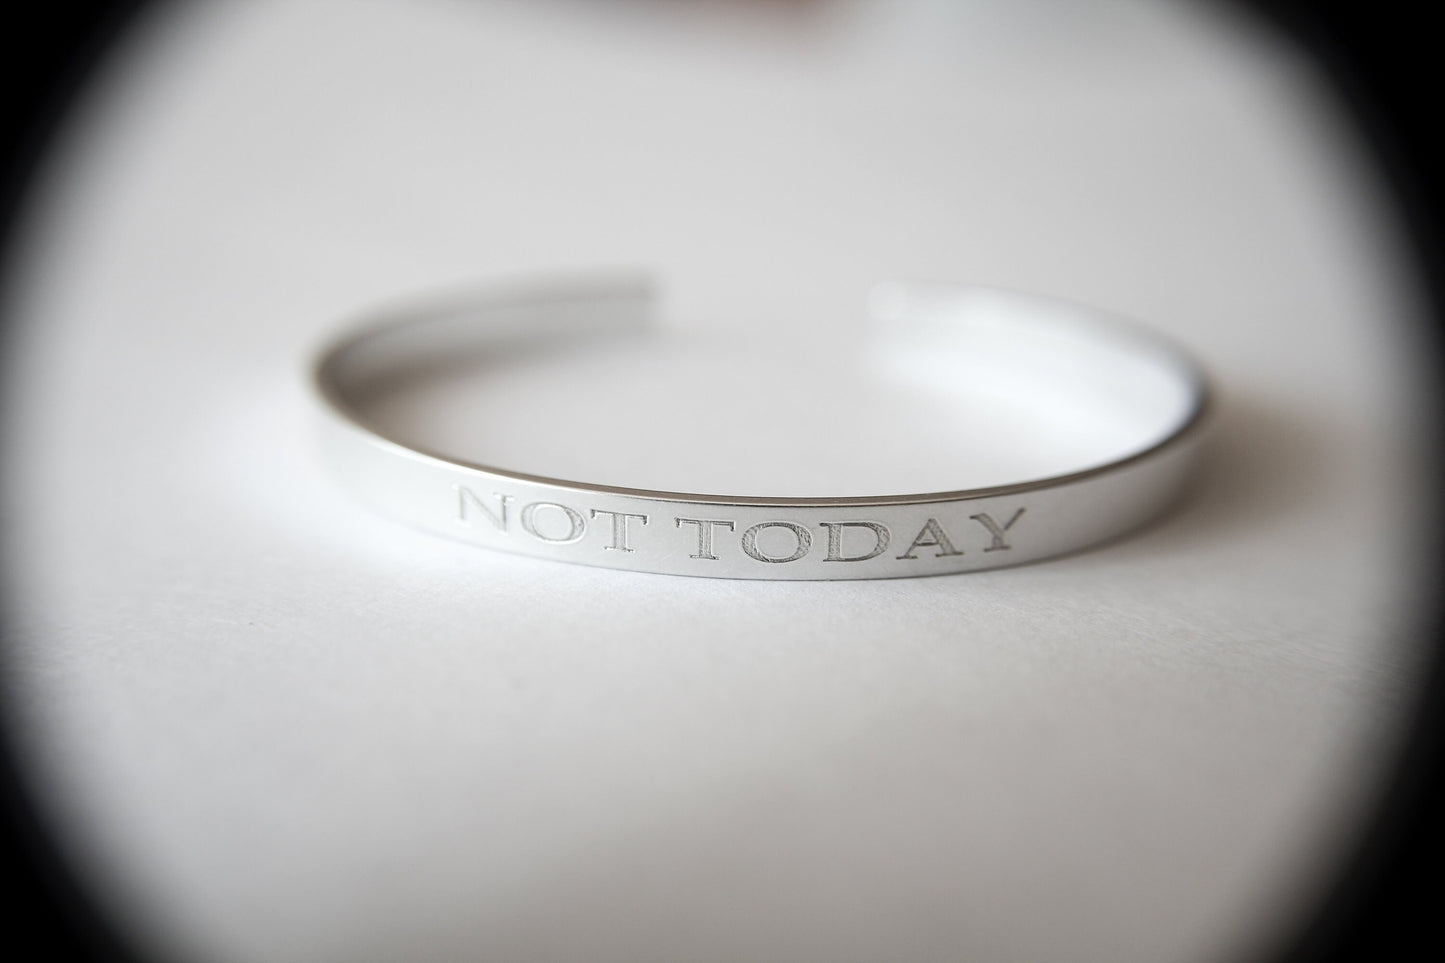 Not Today Bracelet, Not Today Cuff Bracelet, Not Today Cuff, Pastor Gift, Religious Gift, Inspirational Gift, Motivational Cuff, Gift